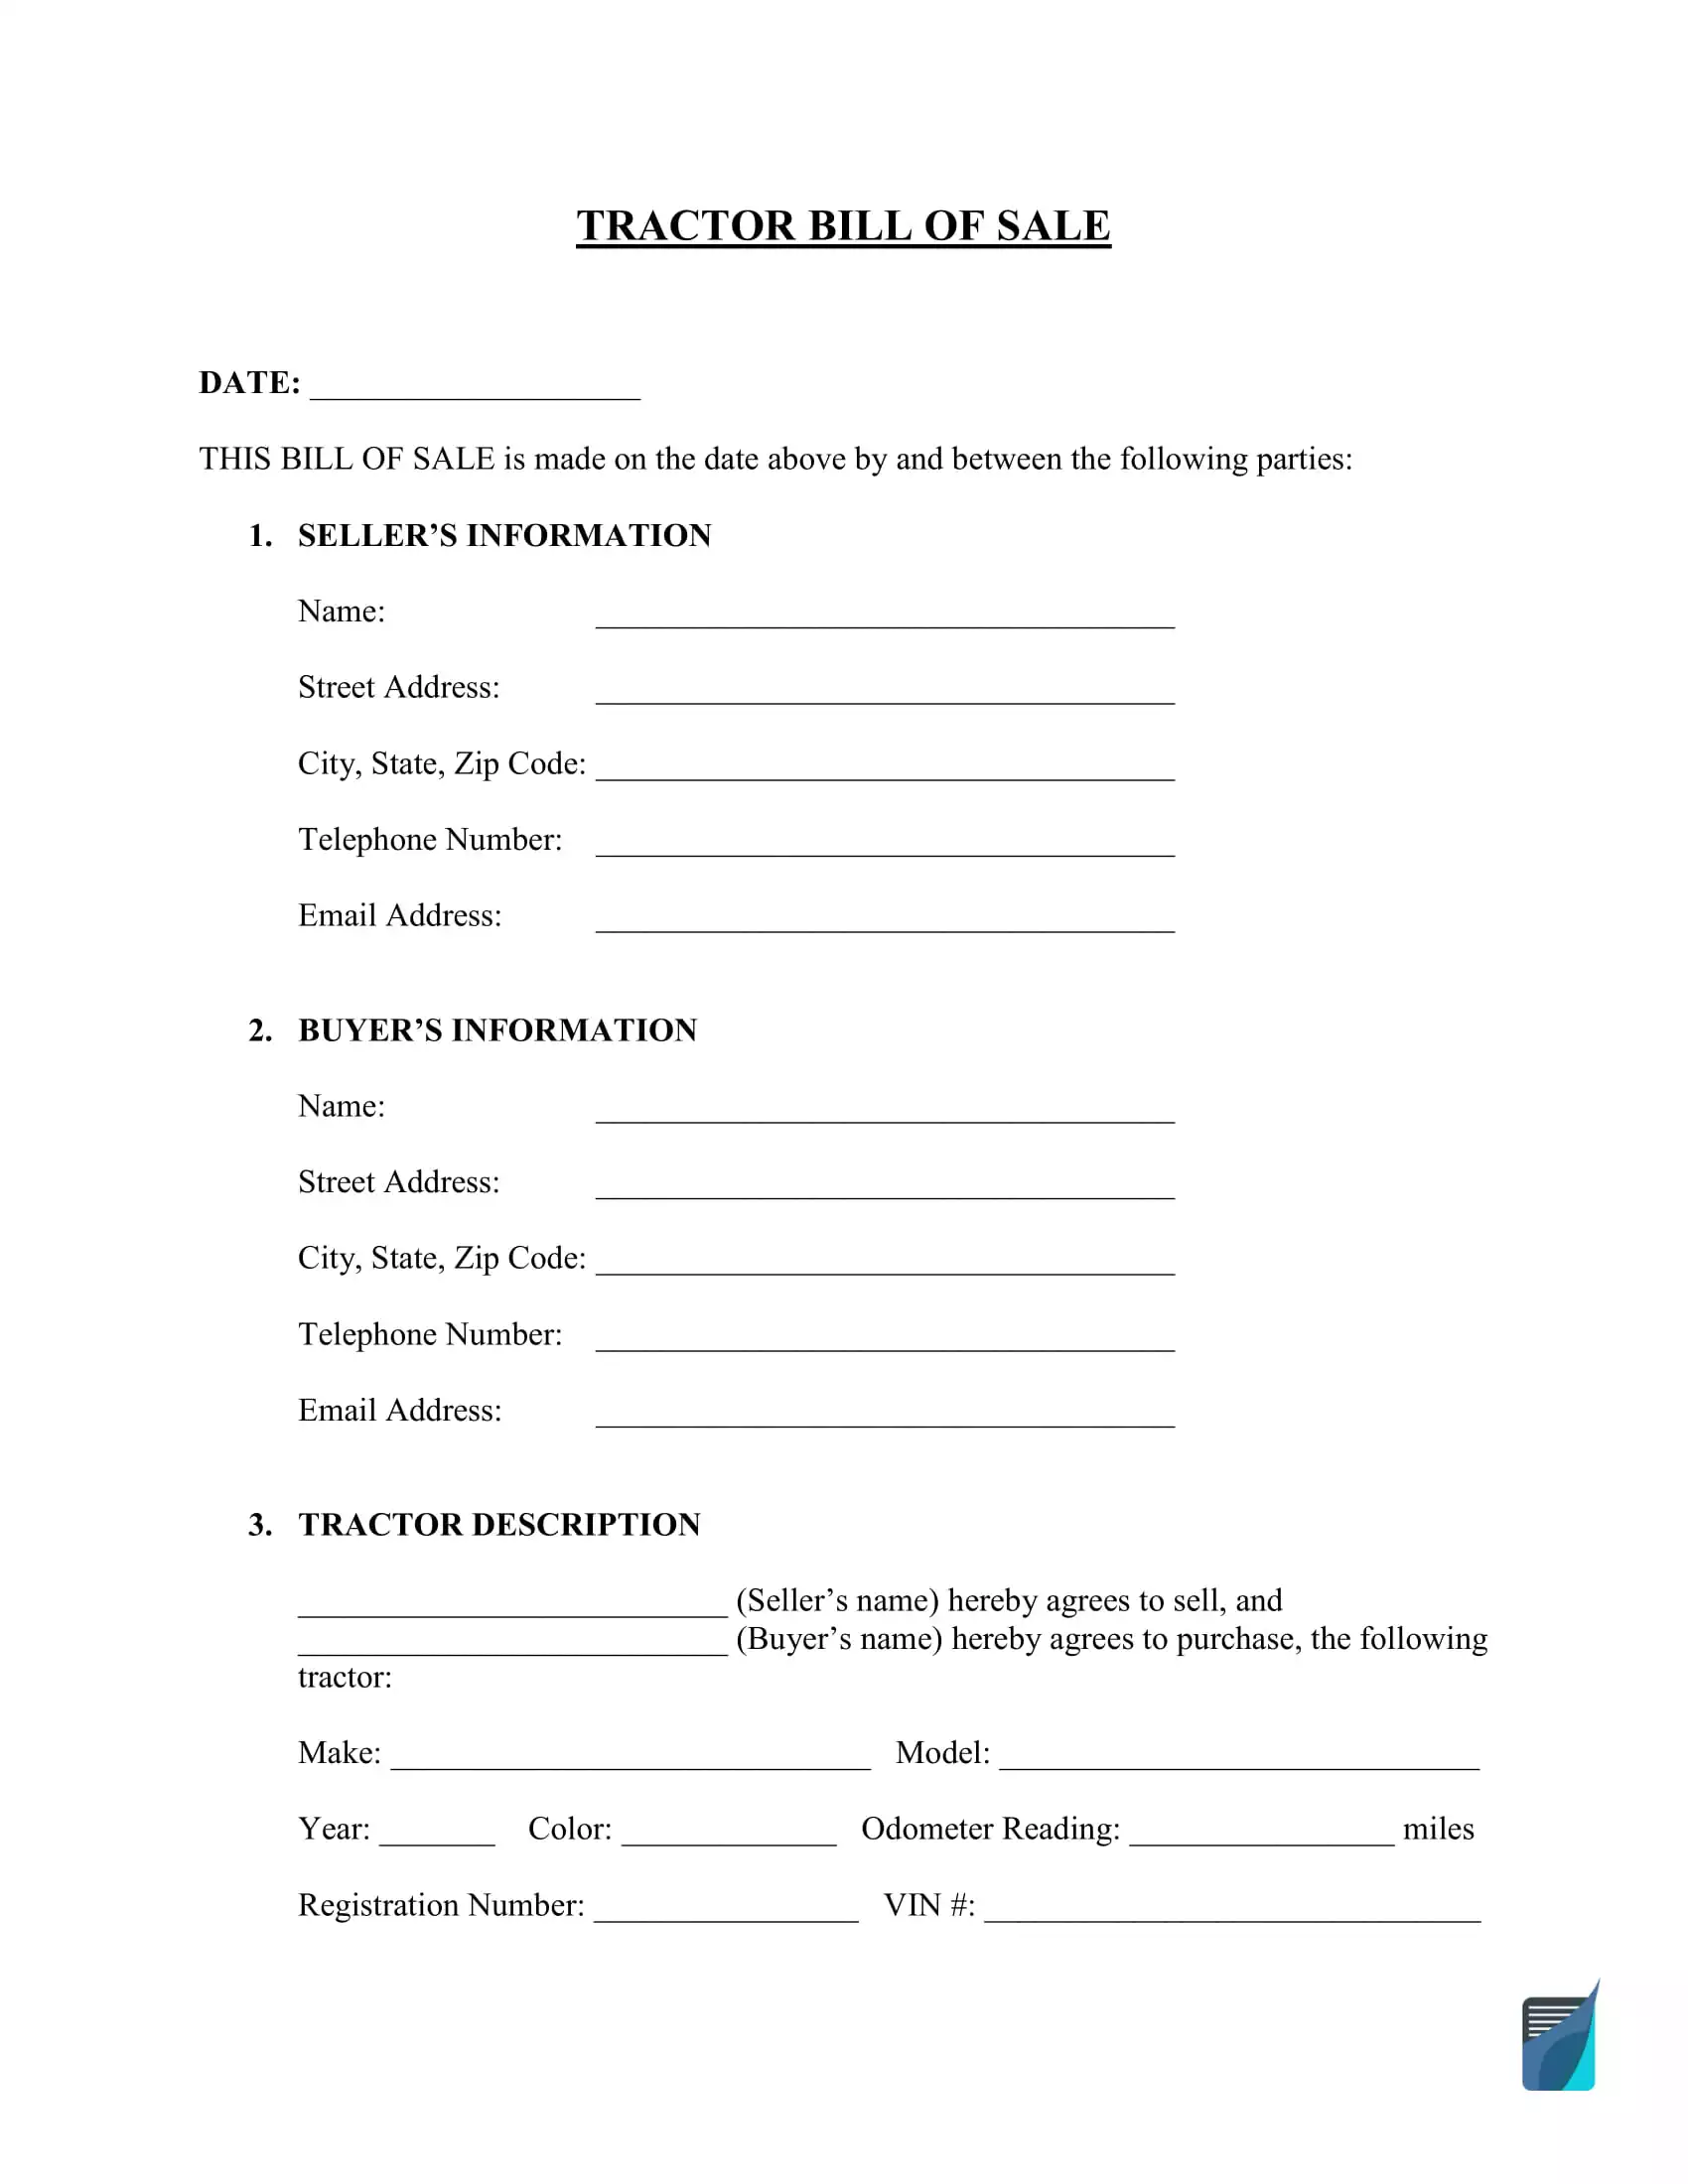 free-tractor-bill-of-sale-form-template-formspal-t-7-bill-of-sale